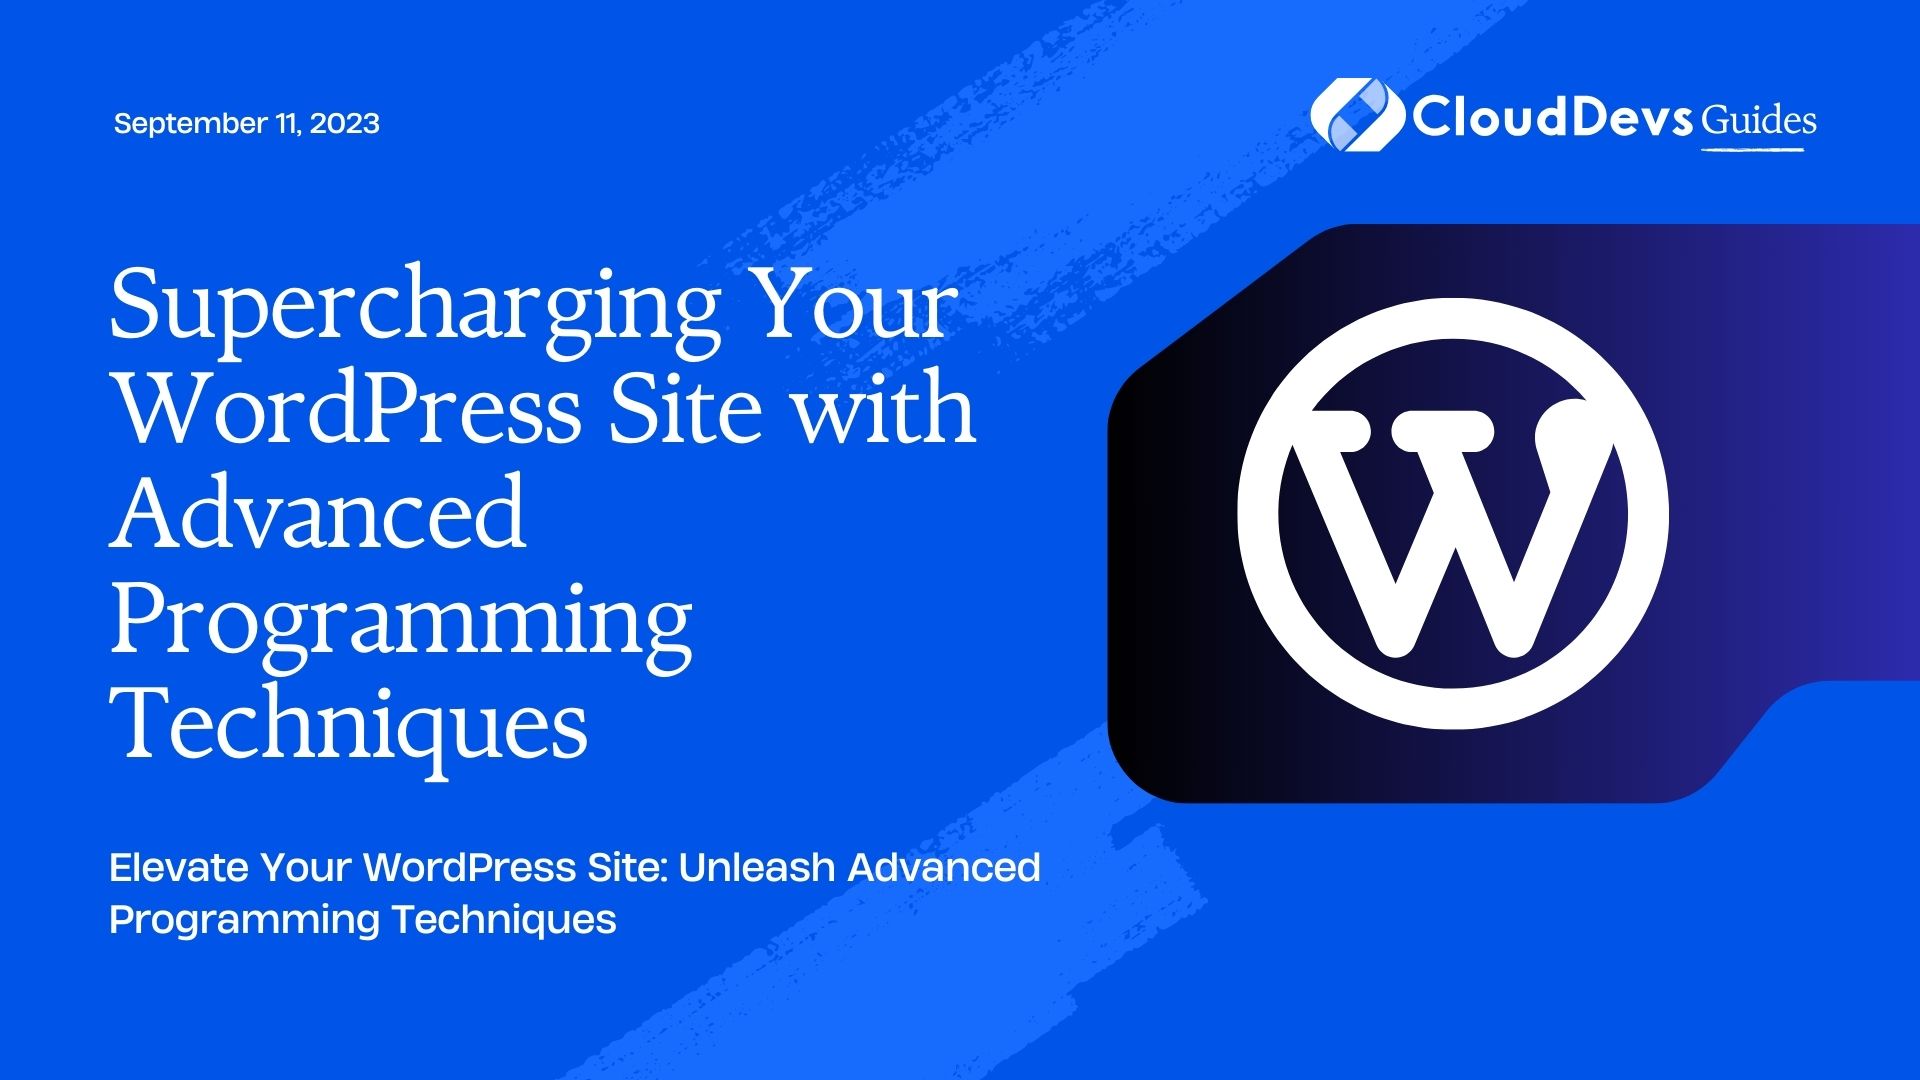 Supercharging Your WordPress Site with Advanced Programming Techniques